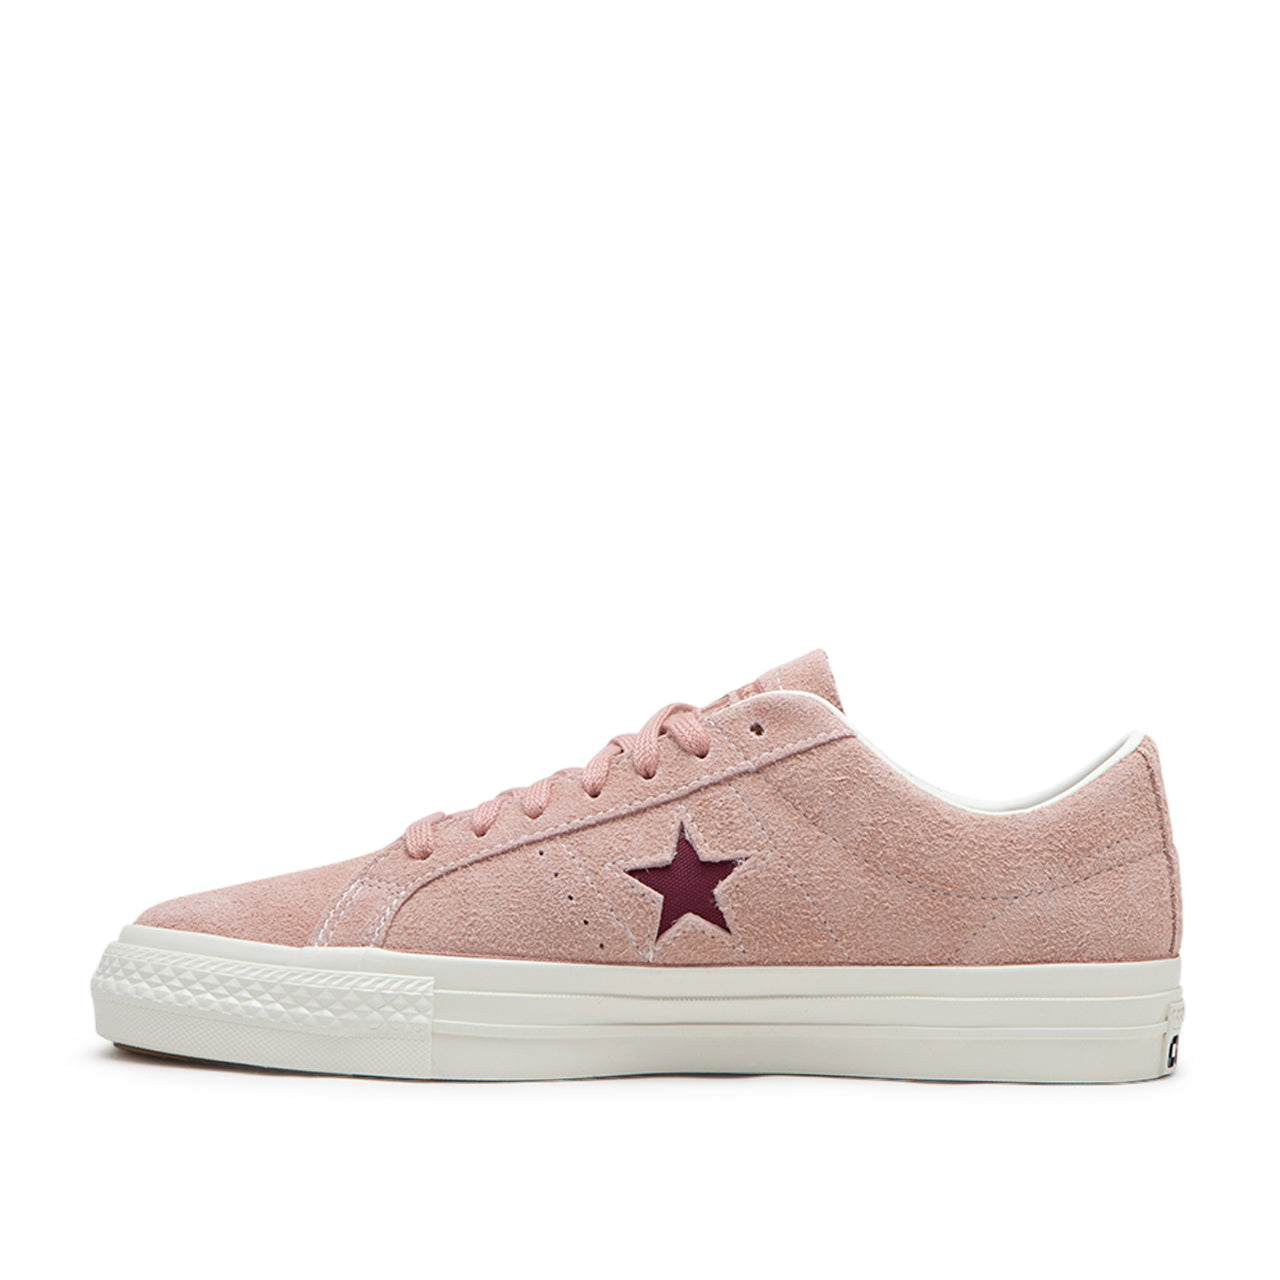 Converse One Star Pro Vintage Suede (Rosa / Weiß)  - Allike Store